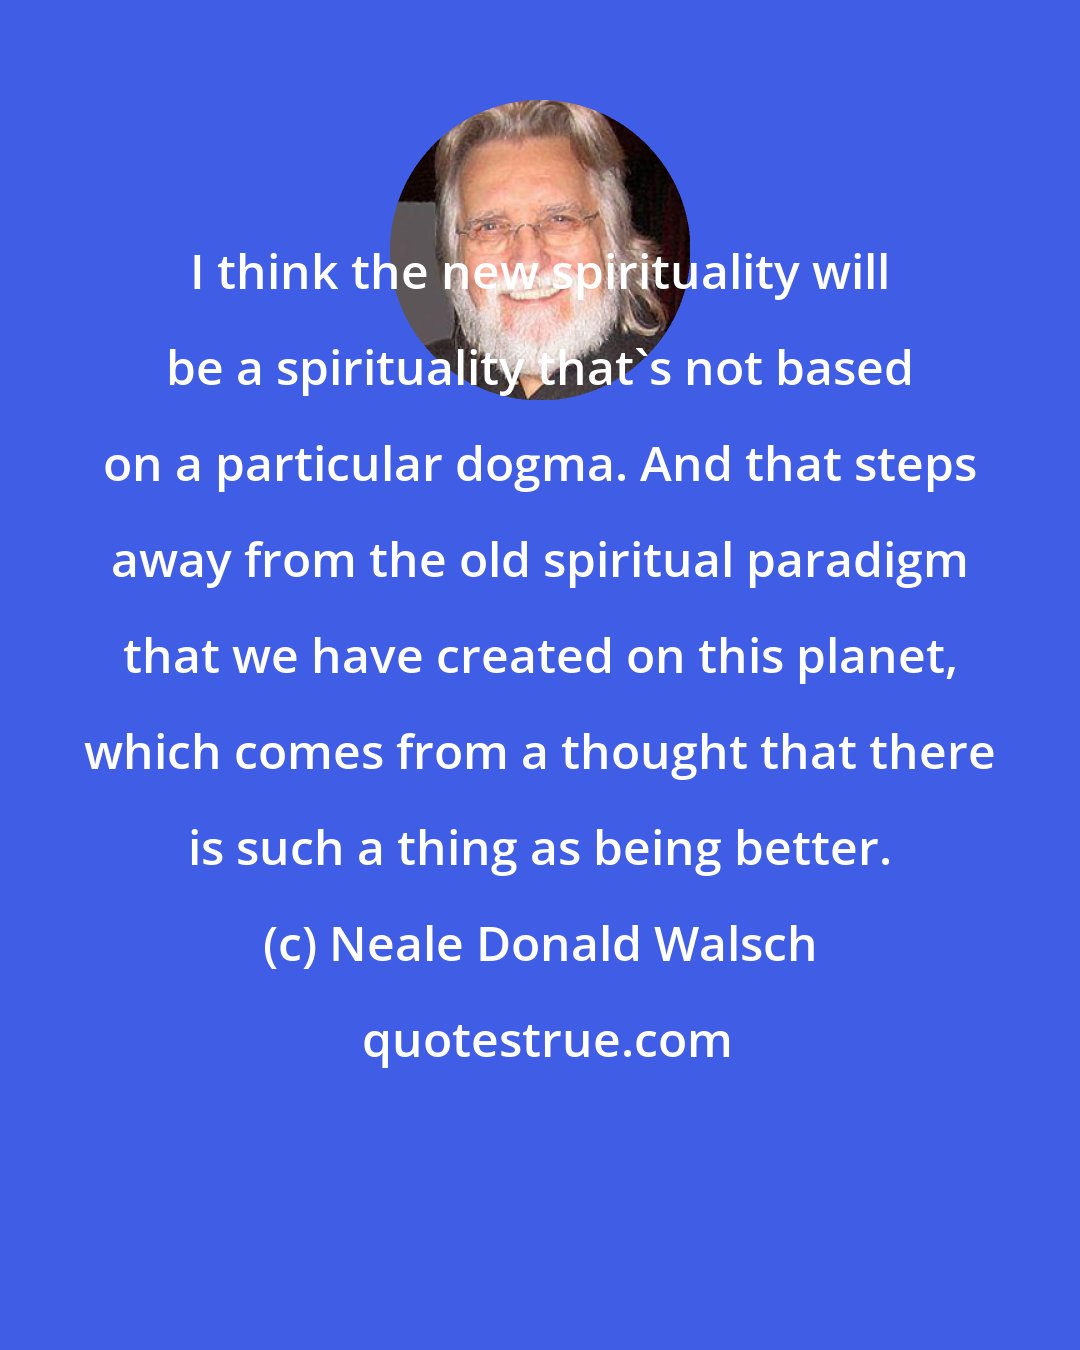 Neale Donald Walsch: I think the new spirituality will be a spirituality that's not based on a particular dogma. And that steps away from the old spiritual paradigm that we have created on this planet, which comes from a thought that there is such a thing as being better.